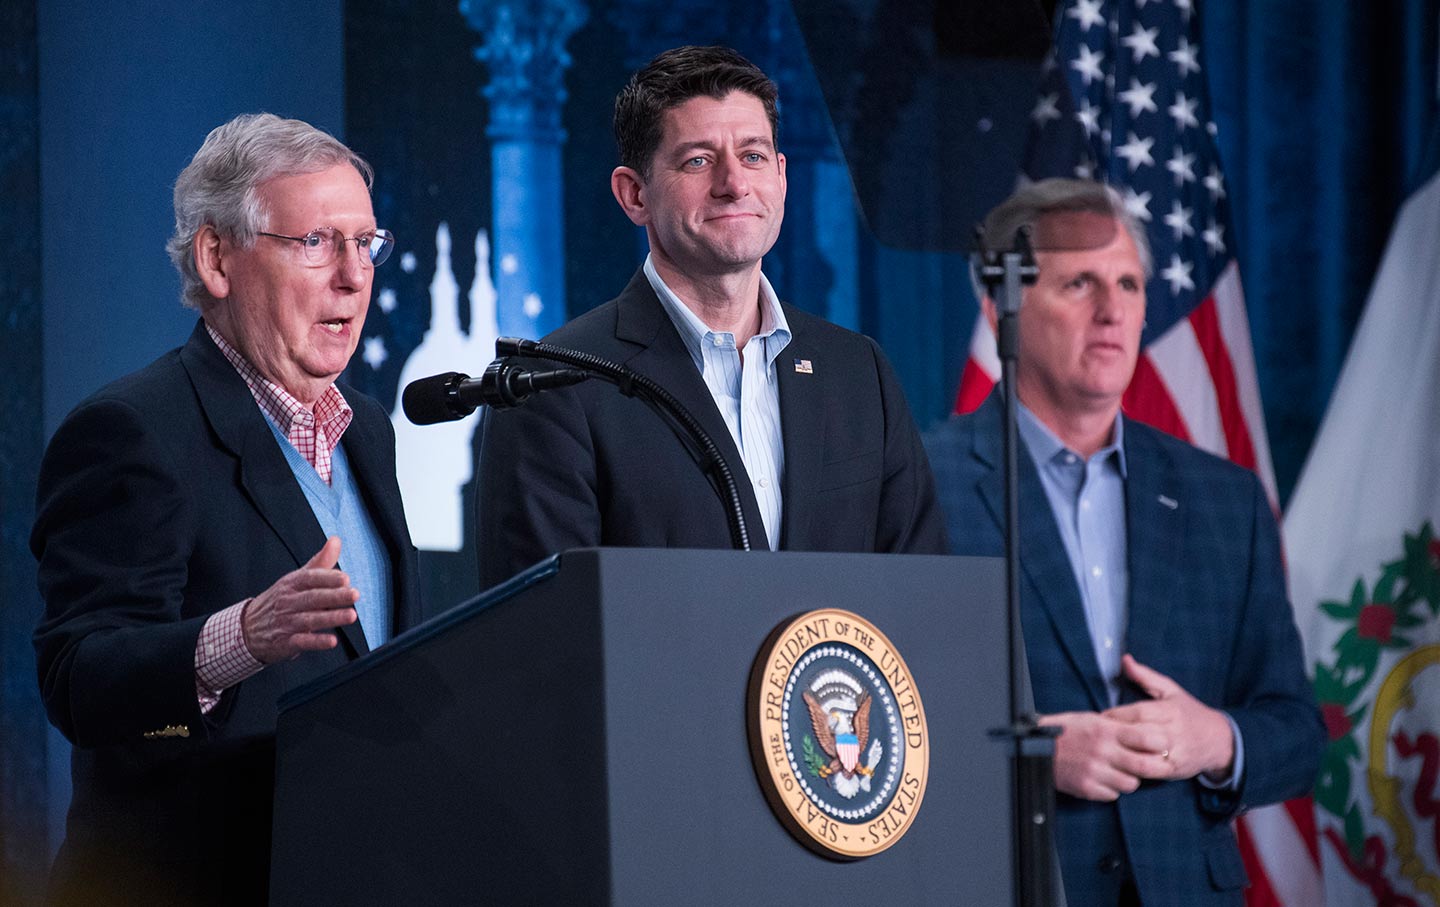 Mitch McConnell, Paul Ryan, and Kevin McCarthy